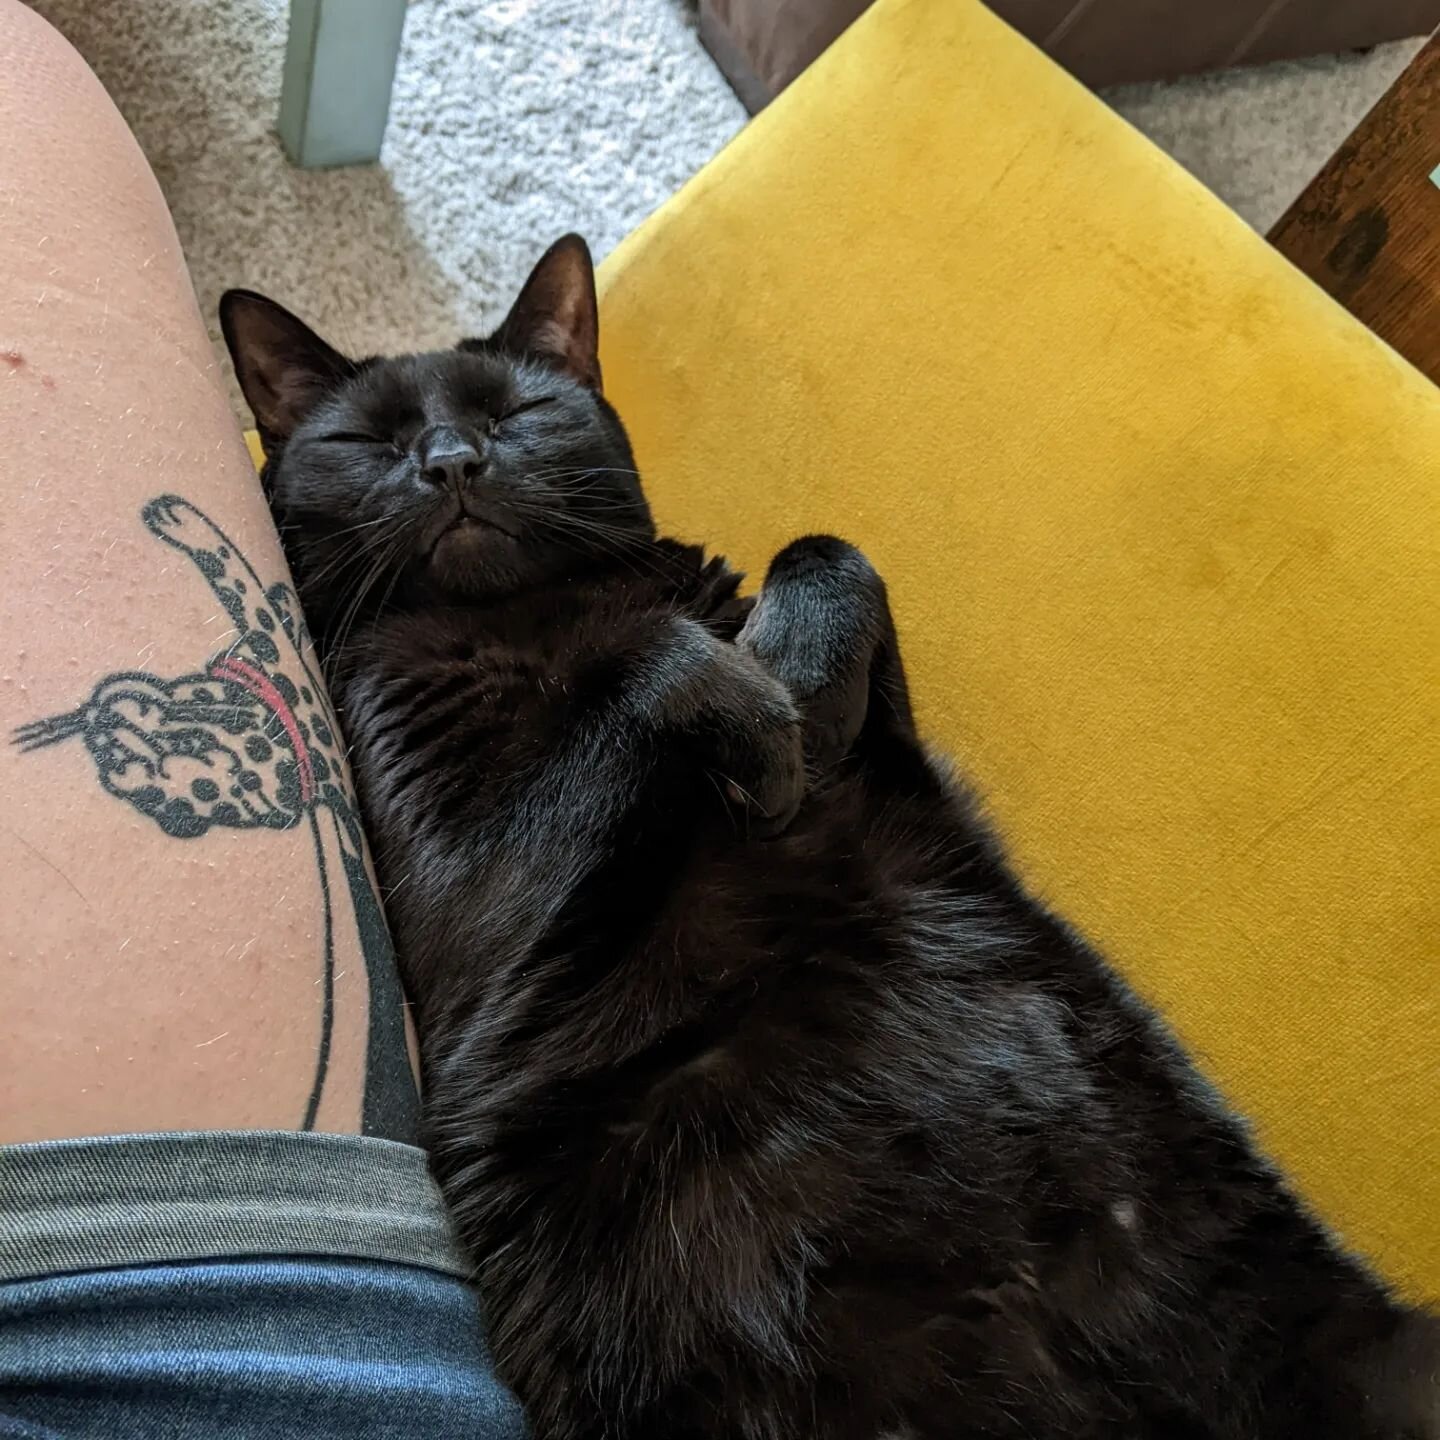 He has figured out that I won't move him if he stays in this spot on the chair 🤣